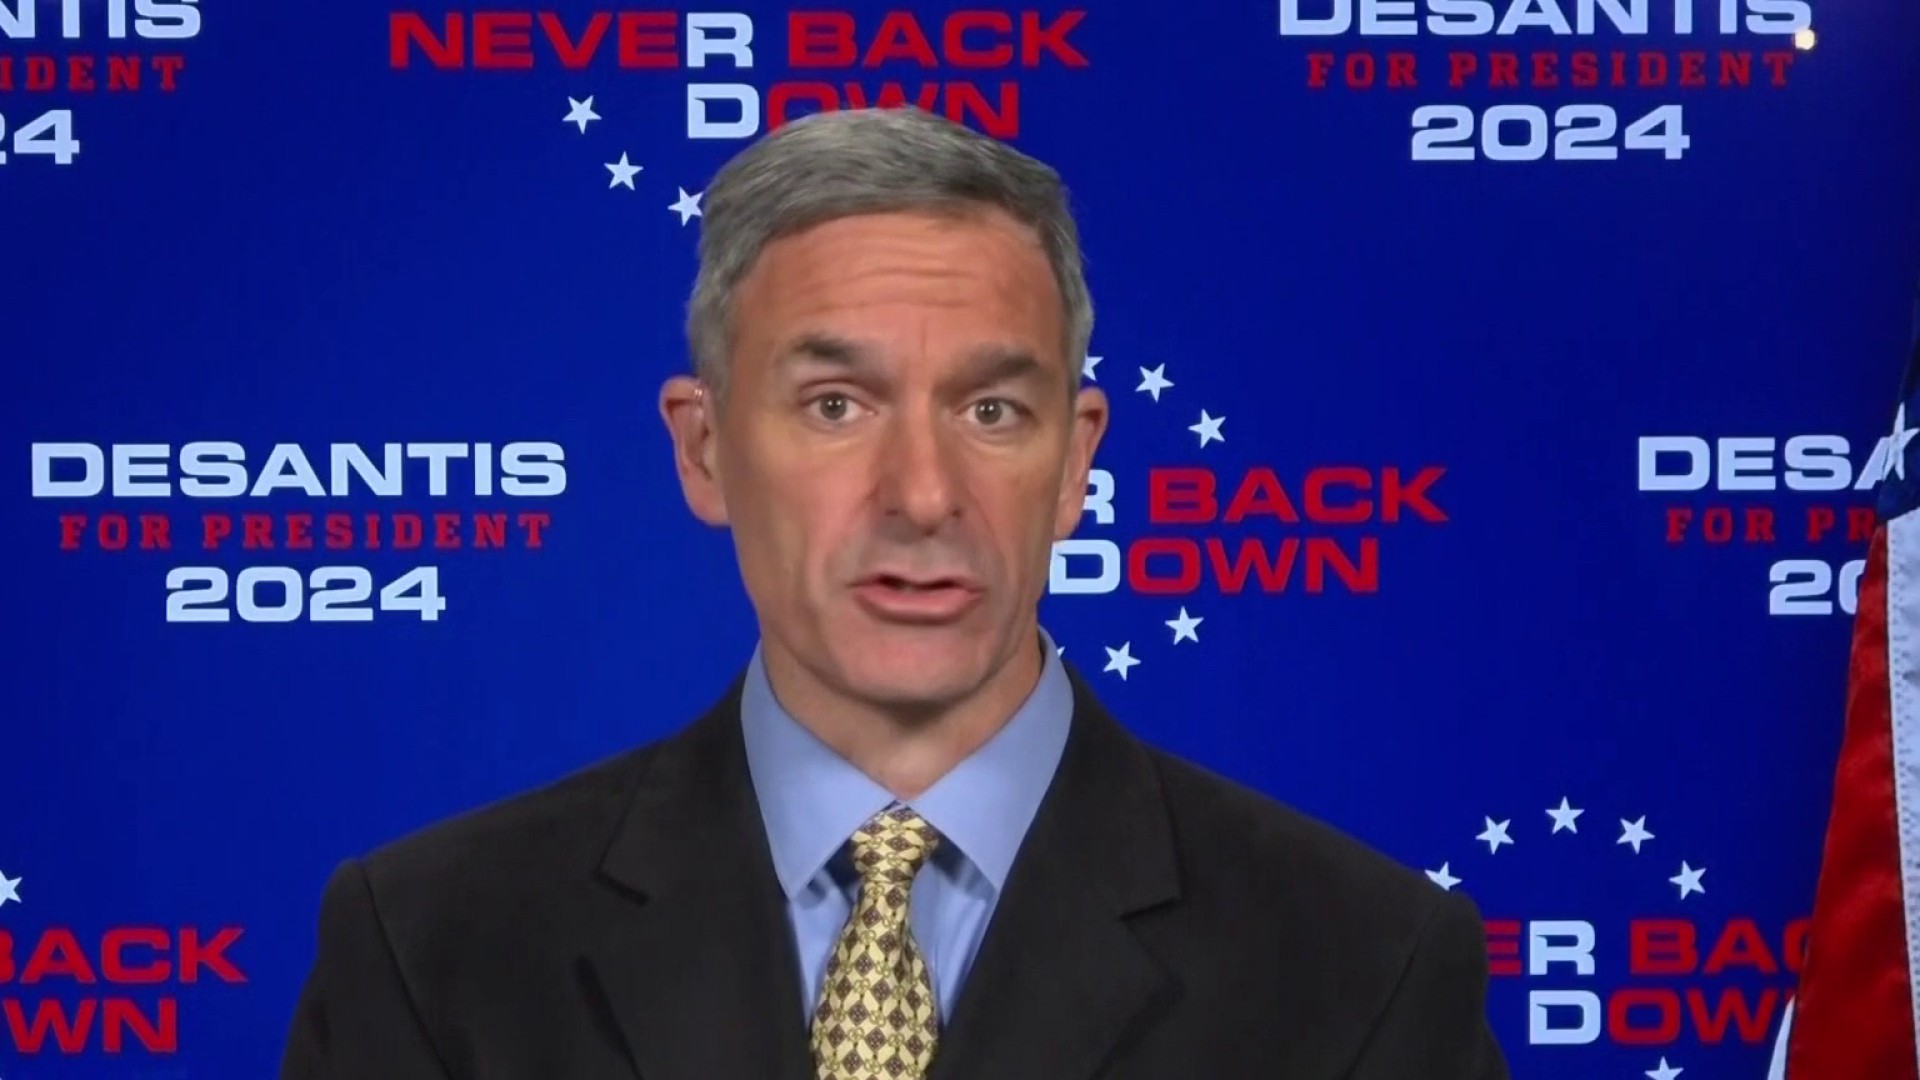 Legal drama around the former president may add to ‘Trump exhaustion syndrome,’ says Cuccinelli